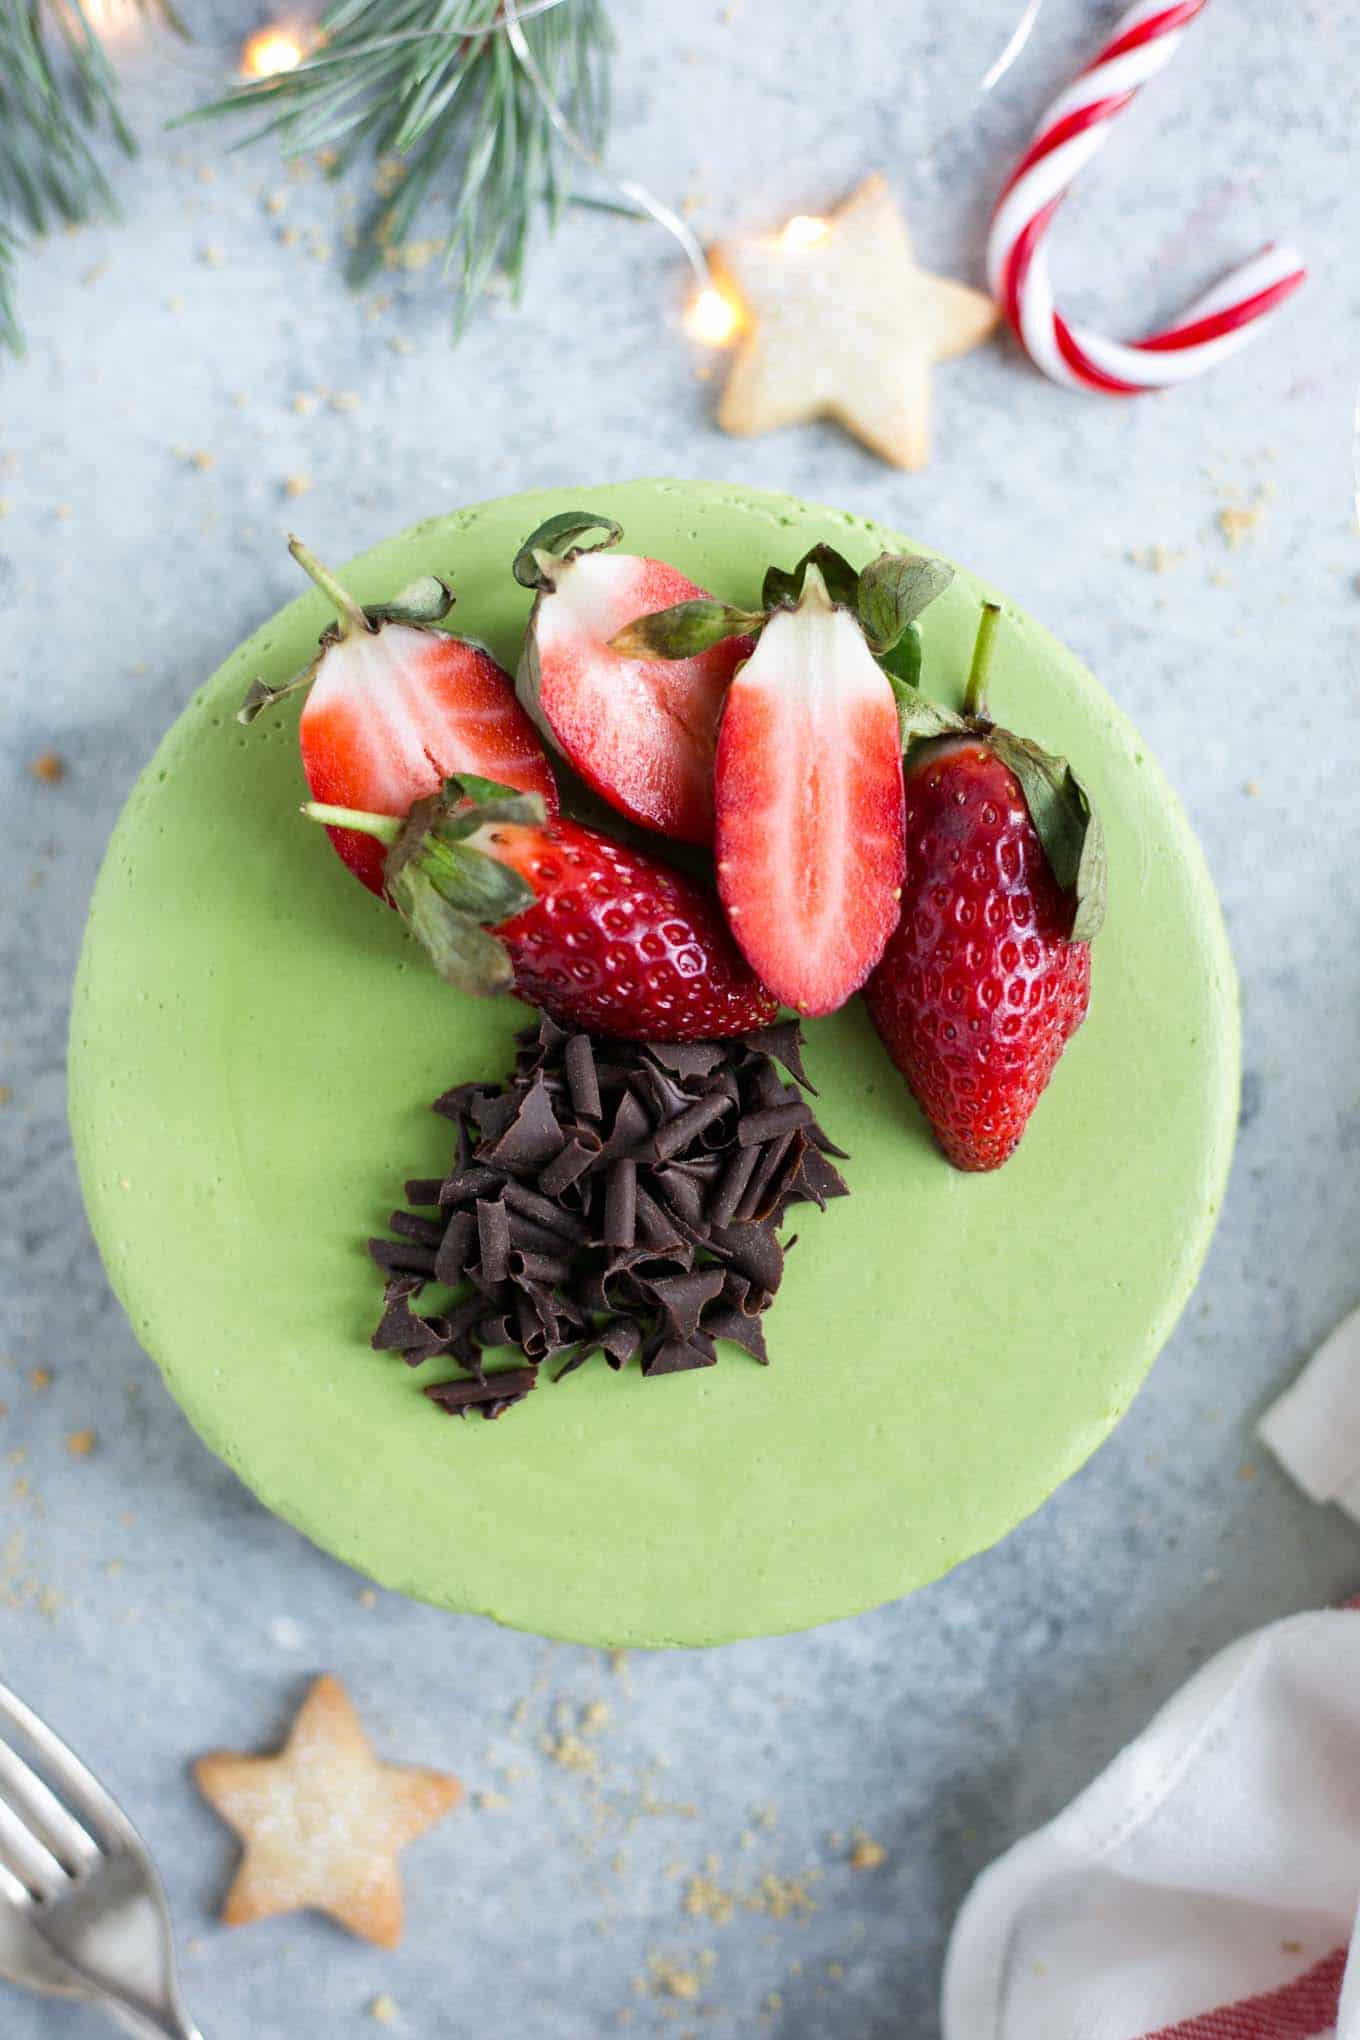 The creamiest matcha and ginger cheesecake! Soft and velvety texture, delicious and easy to make! #cheesecake #vegan #matcha #dairyfree | via @annabanana.co